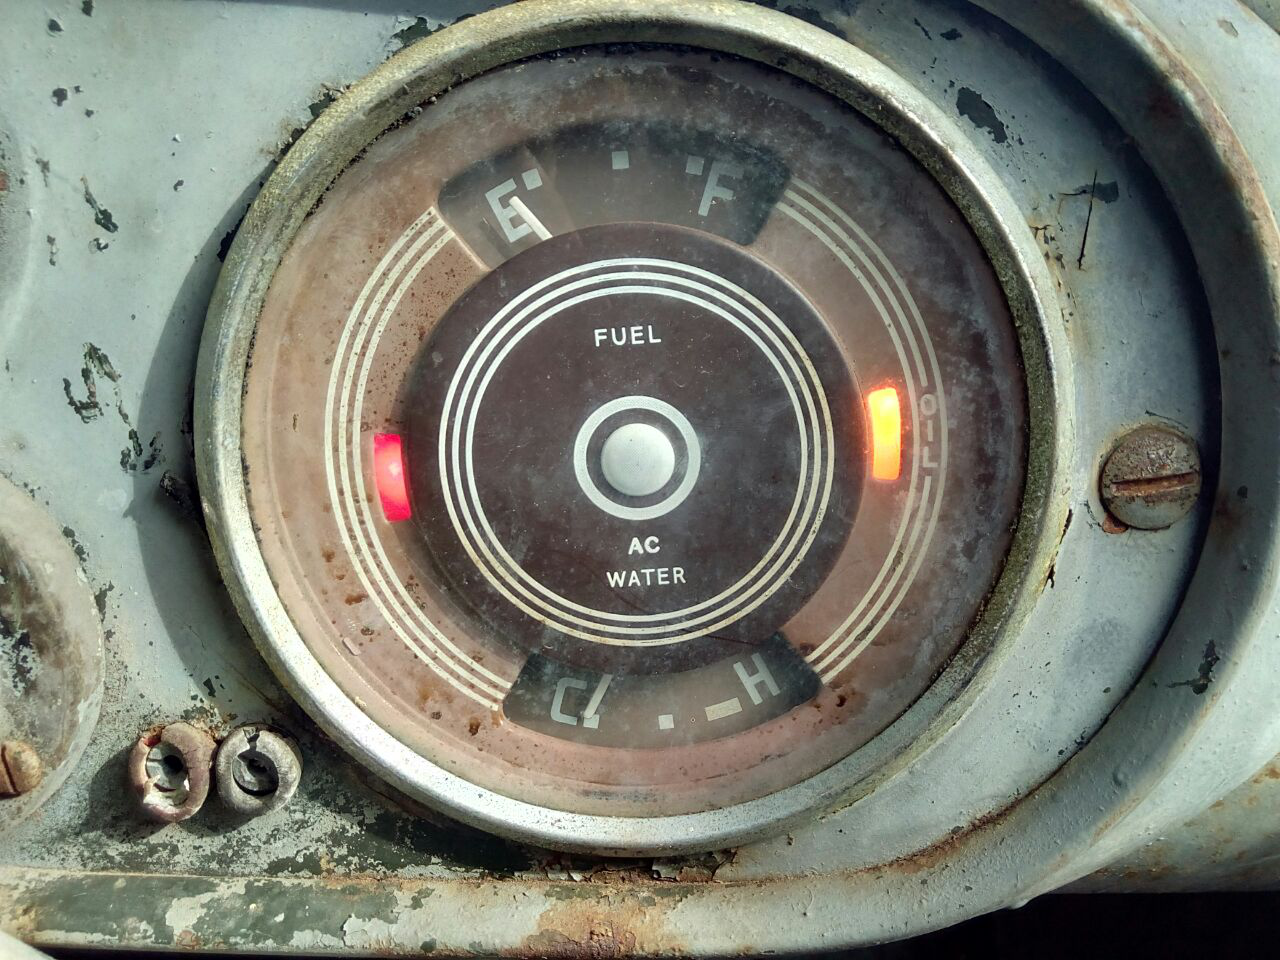 A photograph of the truck's instrument panel, close-up on the
combined fuel gauge/water temp gauge showing the oil pressure warning
and the charging warning lights illuminated.